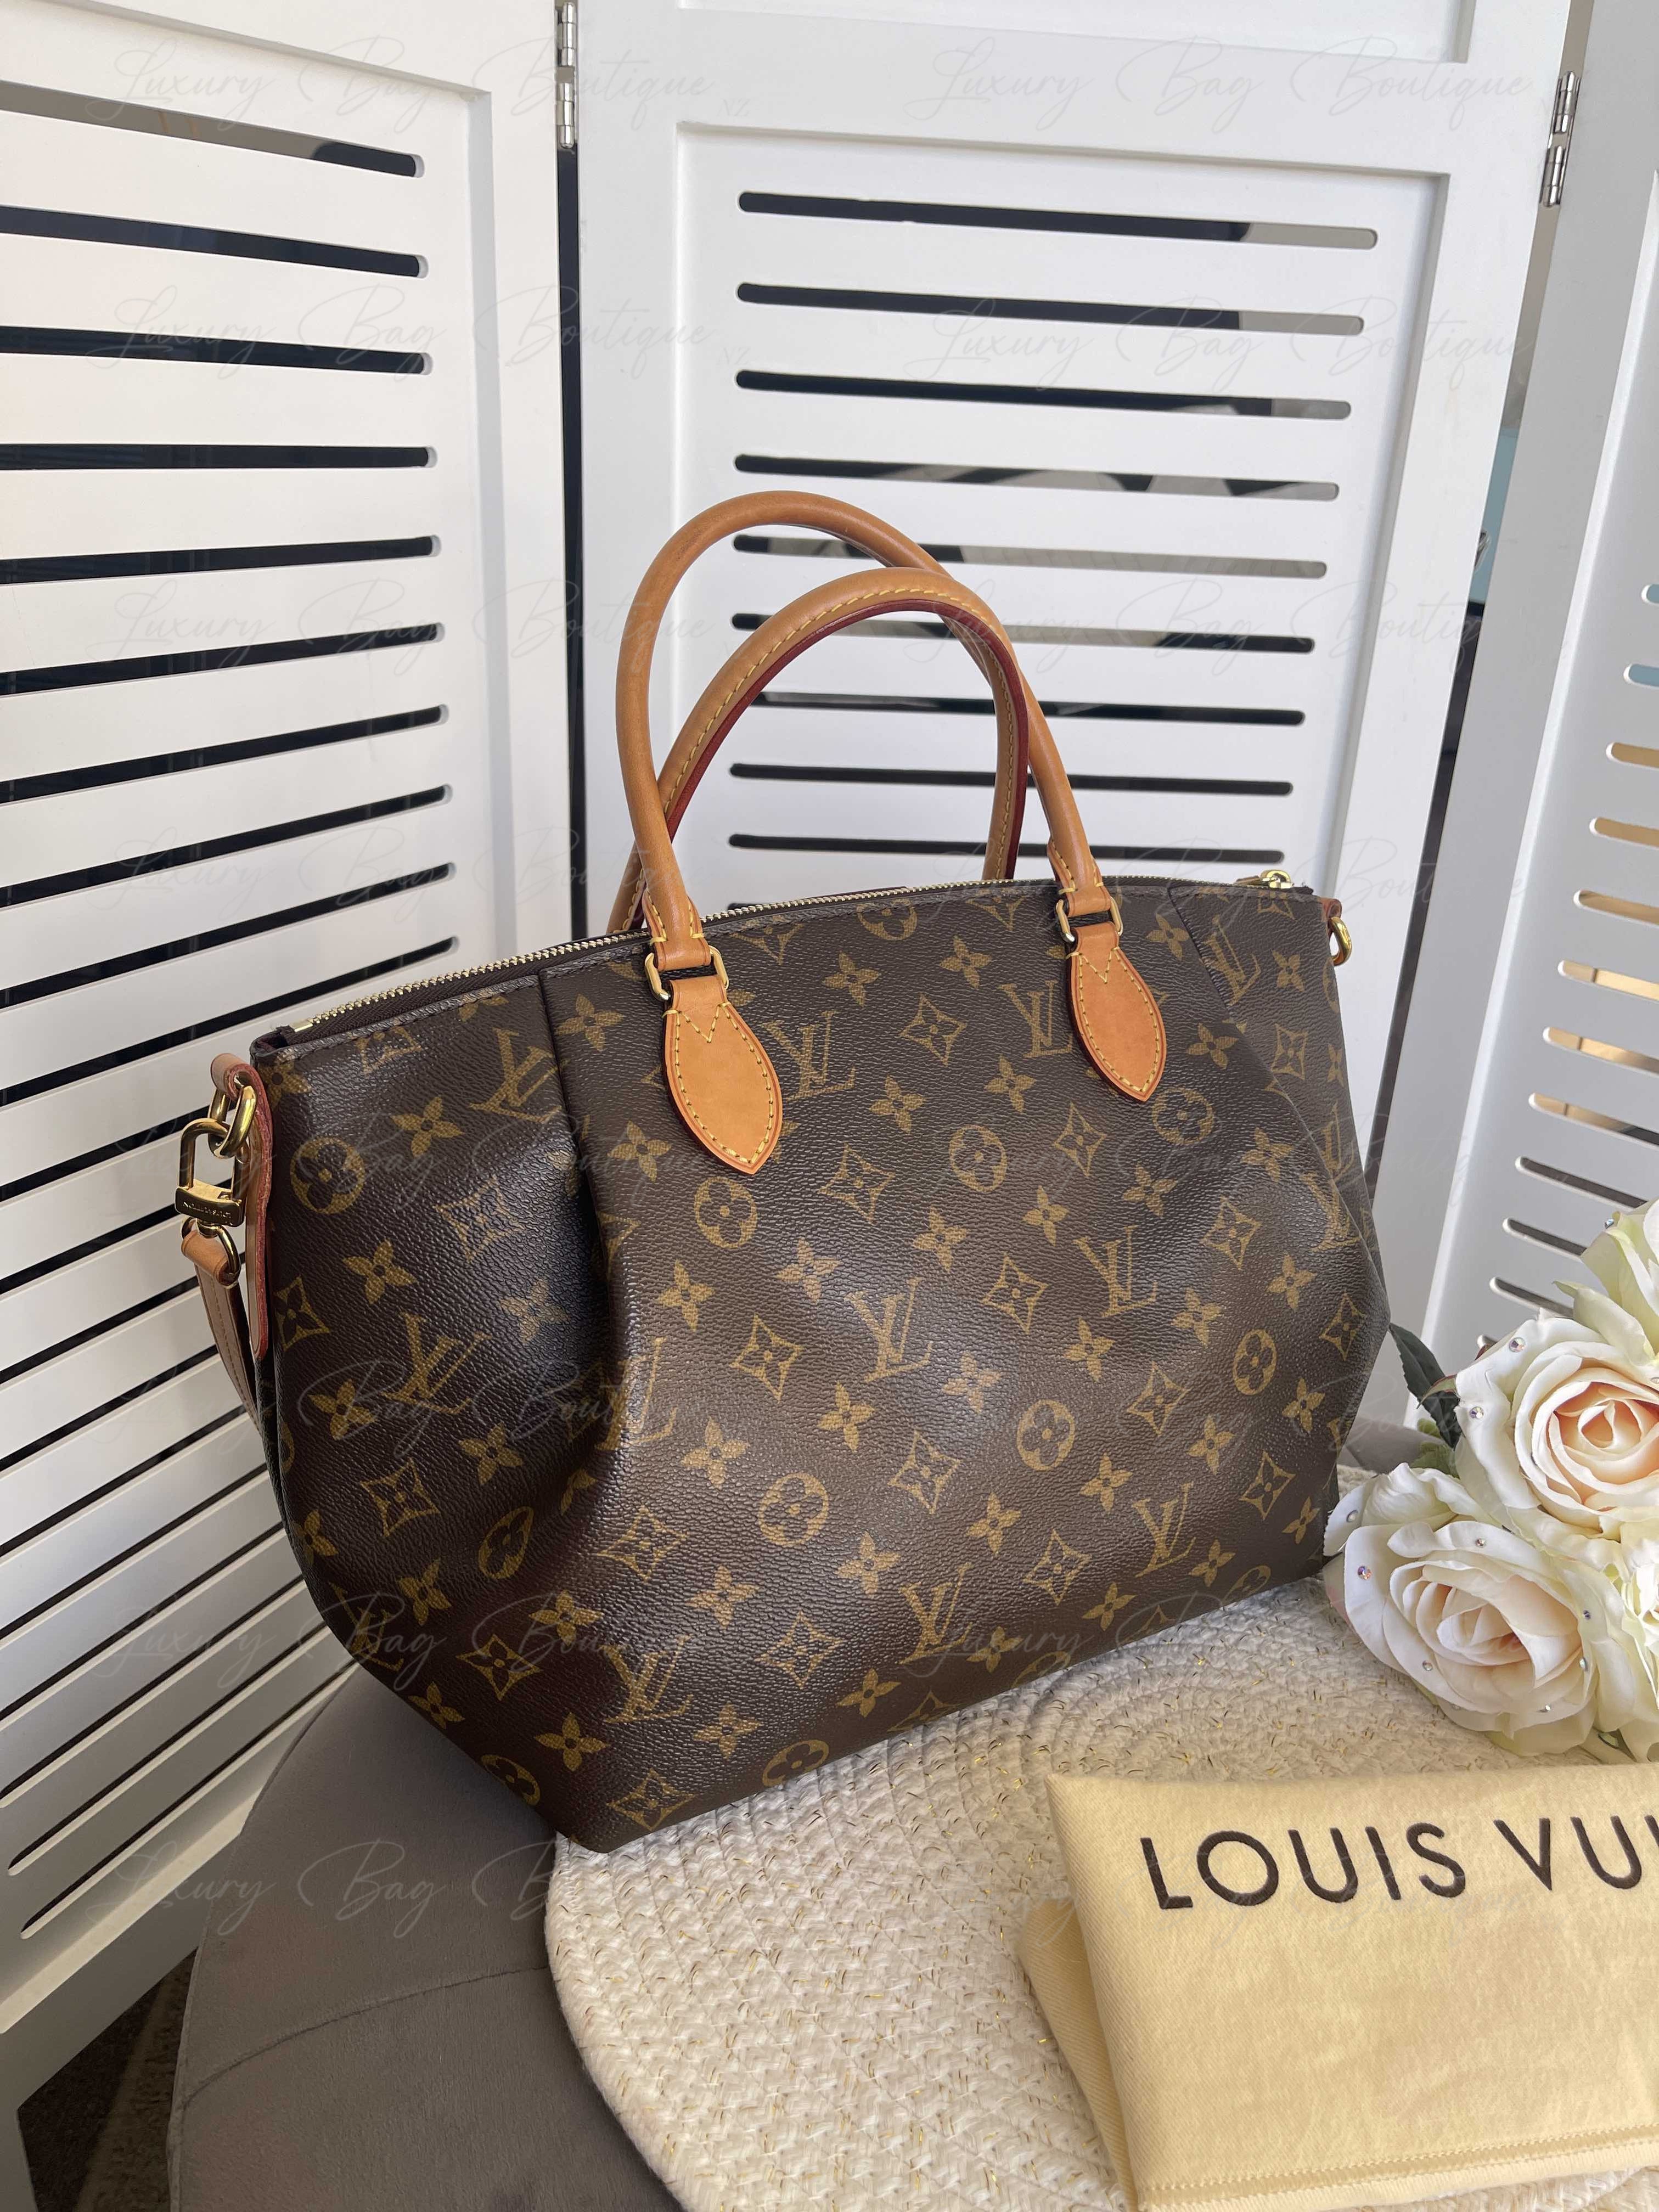 Louis Vuitton Turenne 3 sizes comparison and review  YouTube